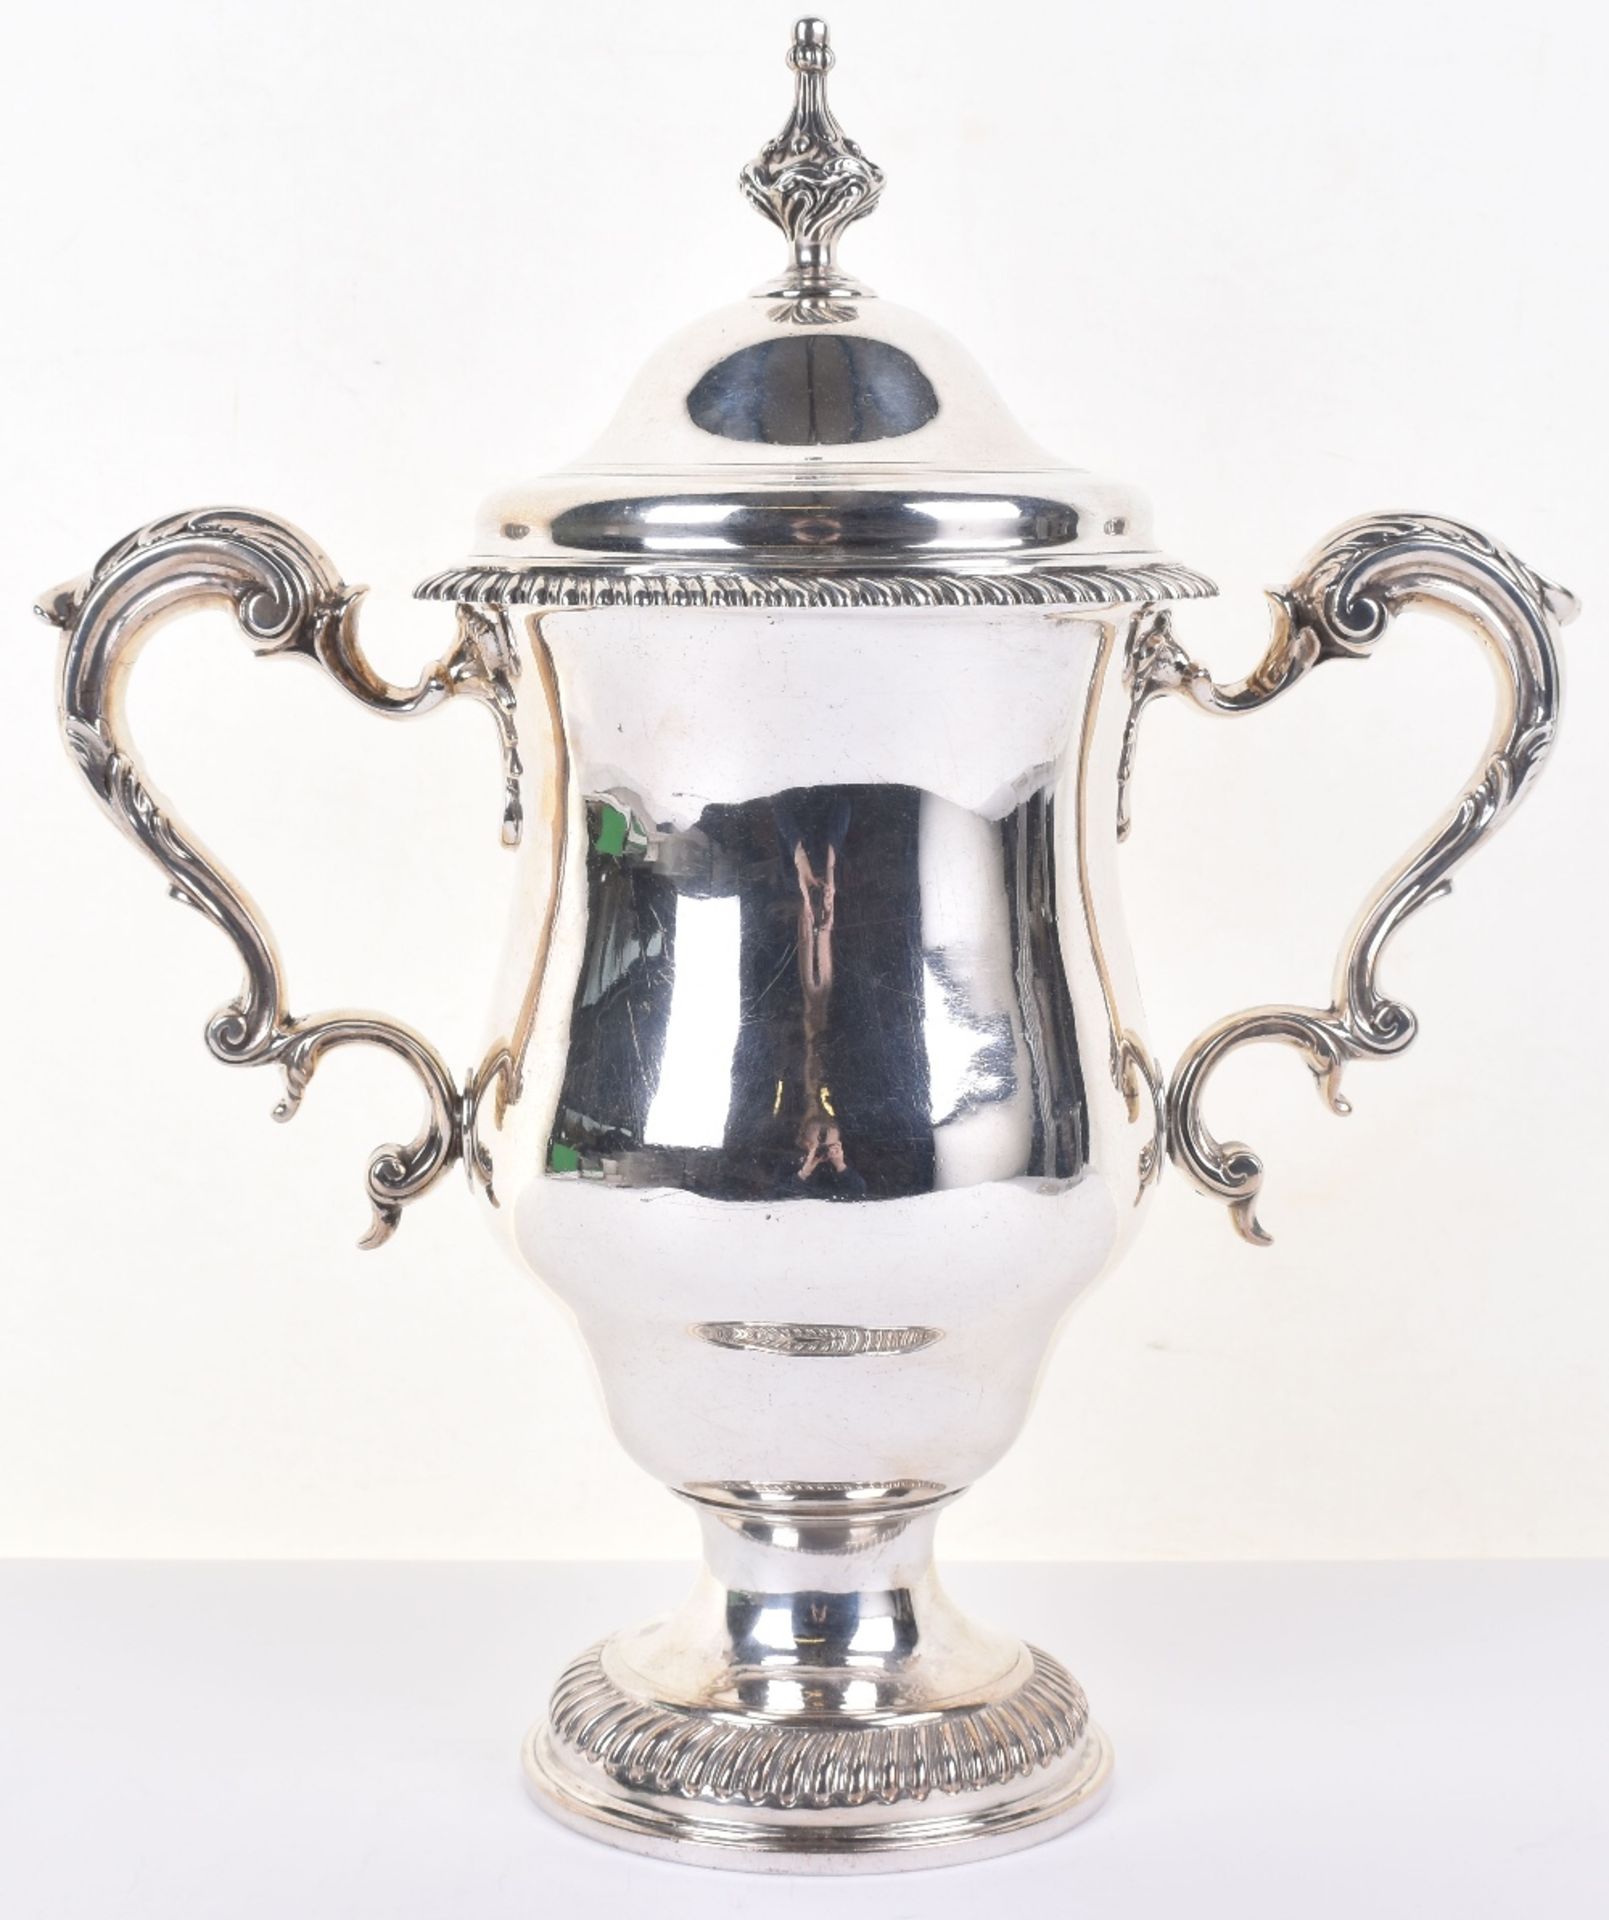 A George III silver trophy cup and cover, 1771, by James King I